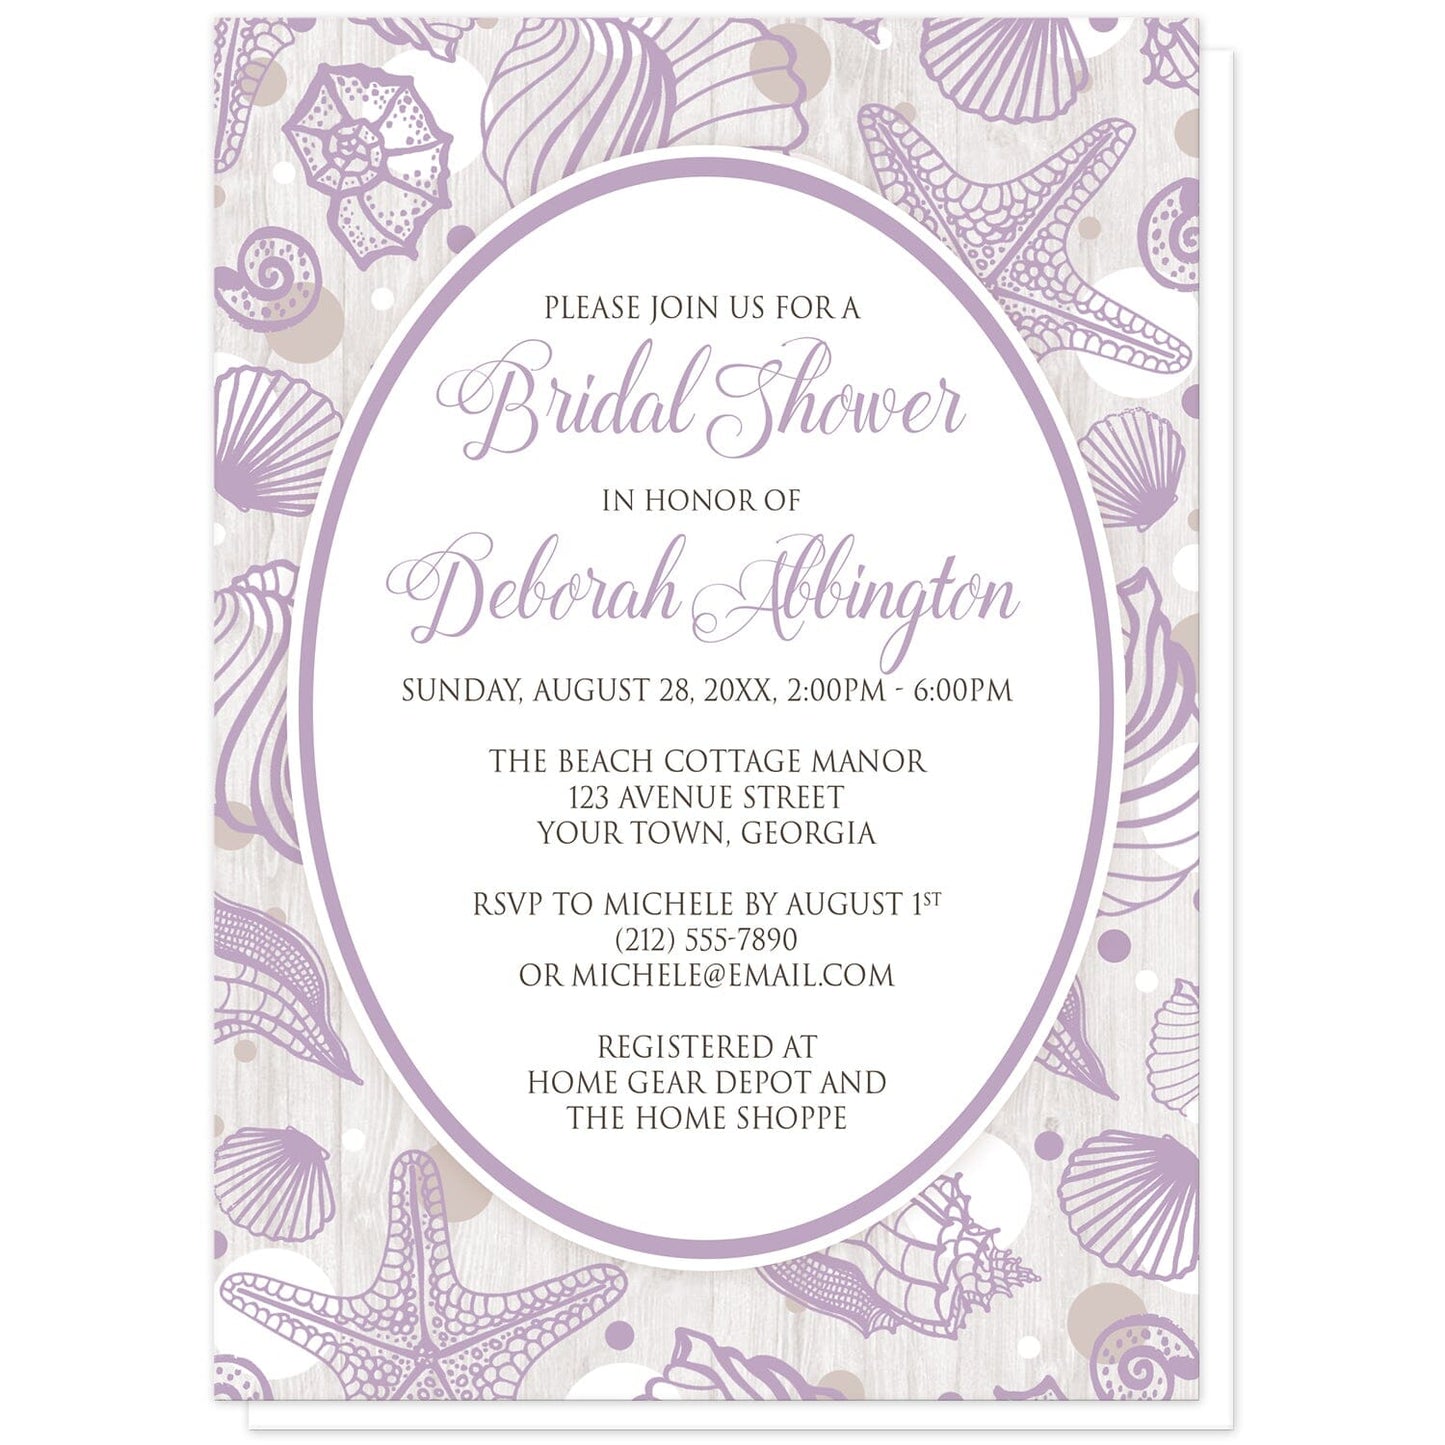 Purple Seashell Whitewashed Wood Beach Bridal Shower Invitations at Artistically Invited. Purple seashell whitewashed wood beach bridal shower invitations with your personalized bridal shower celebration details custom printed in purple and brown inside a purple-outlined white oval. The background of these invites is a lilac purple seashell pattern, with purple, white, and tan circles. The seashells and circles are spread out over a rustic whitewashed wood design.